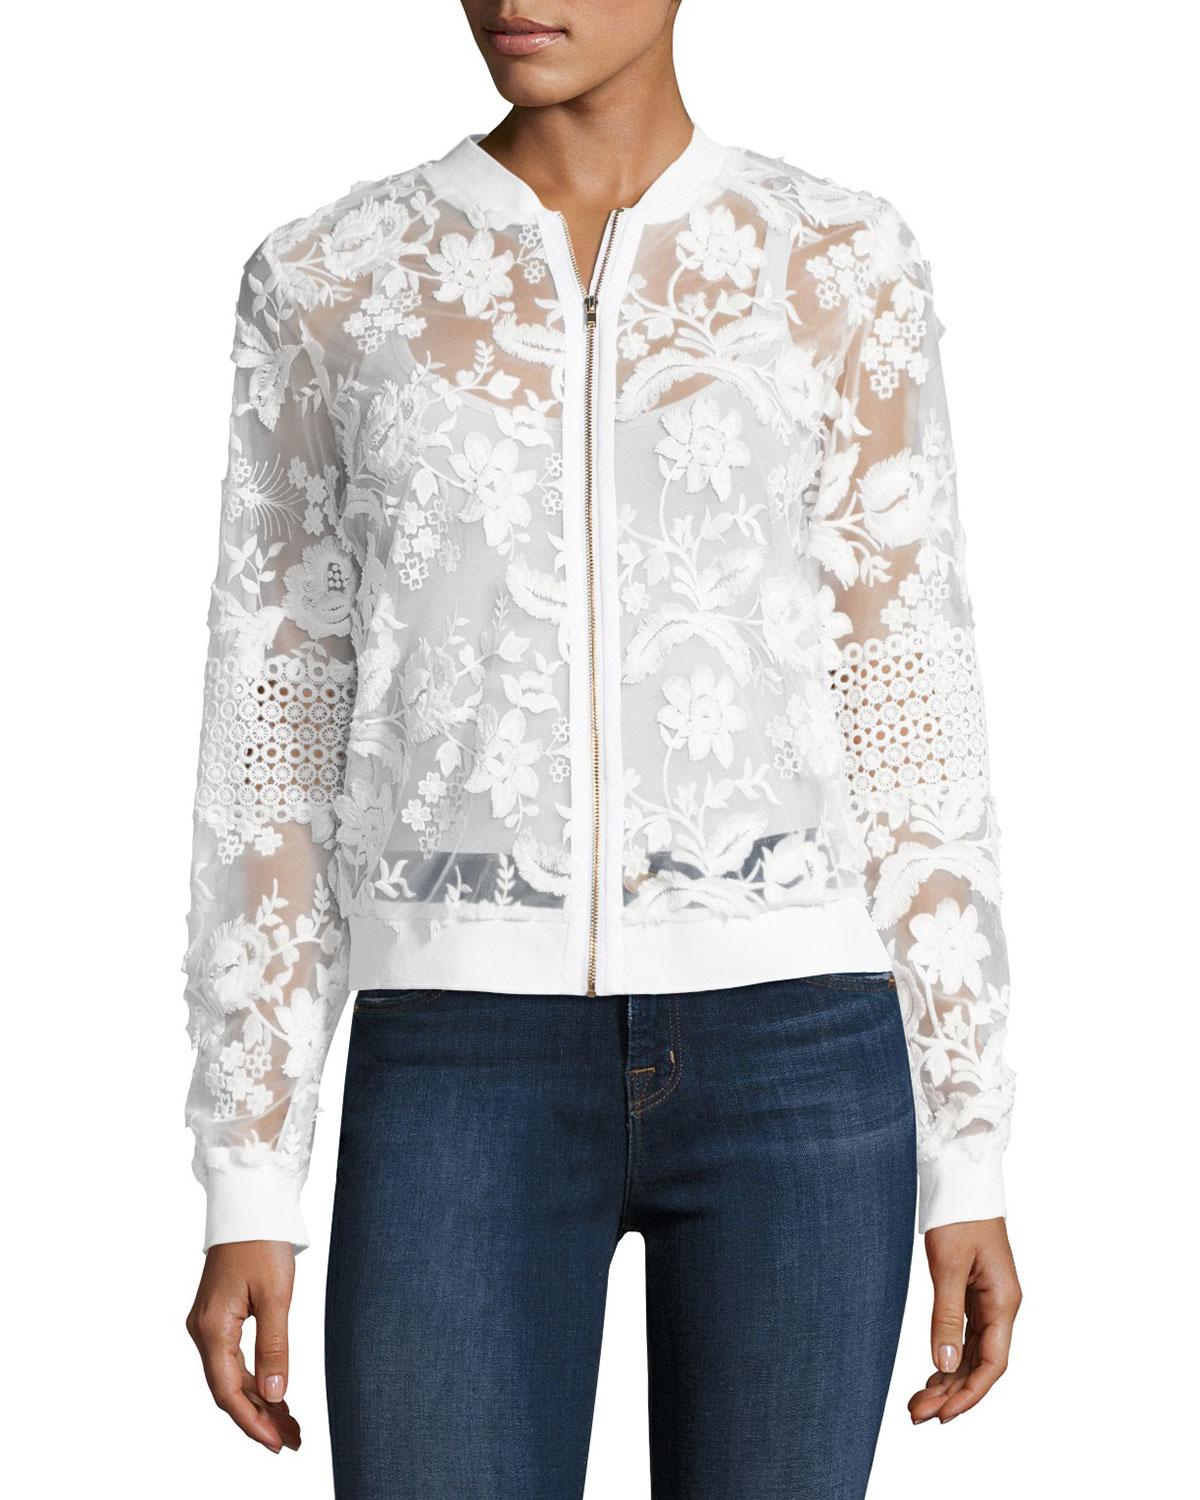 T Tahari Vienna Lace Bomber Jacket in White - Lyst